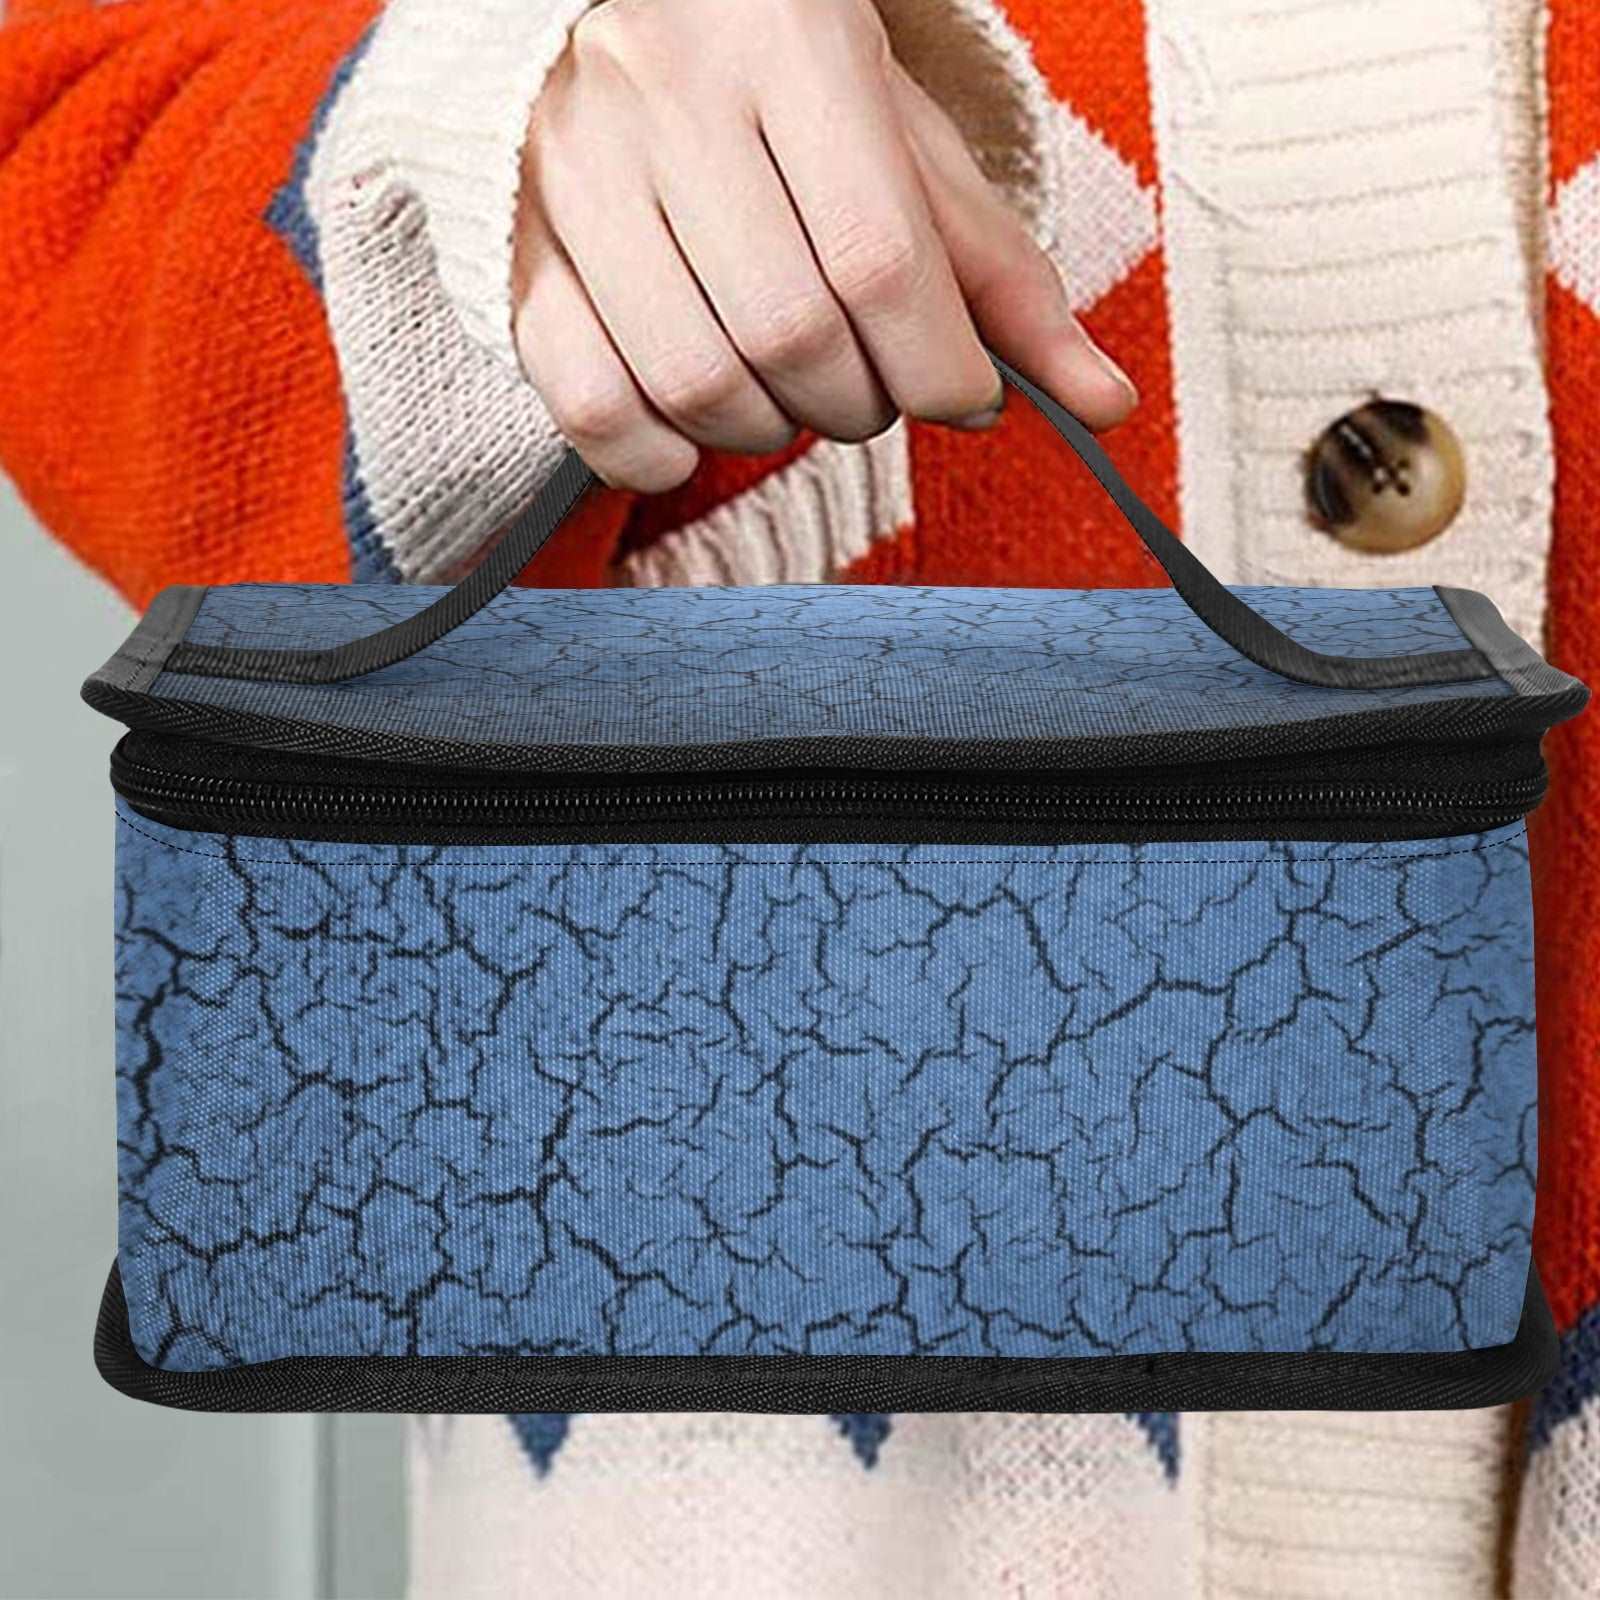 Blue Cracks Insulated Lunch Tote